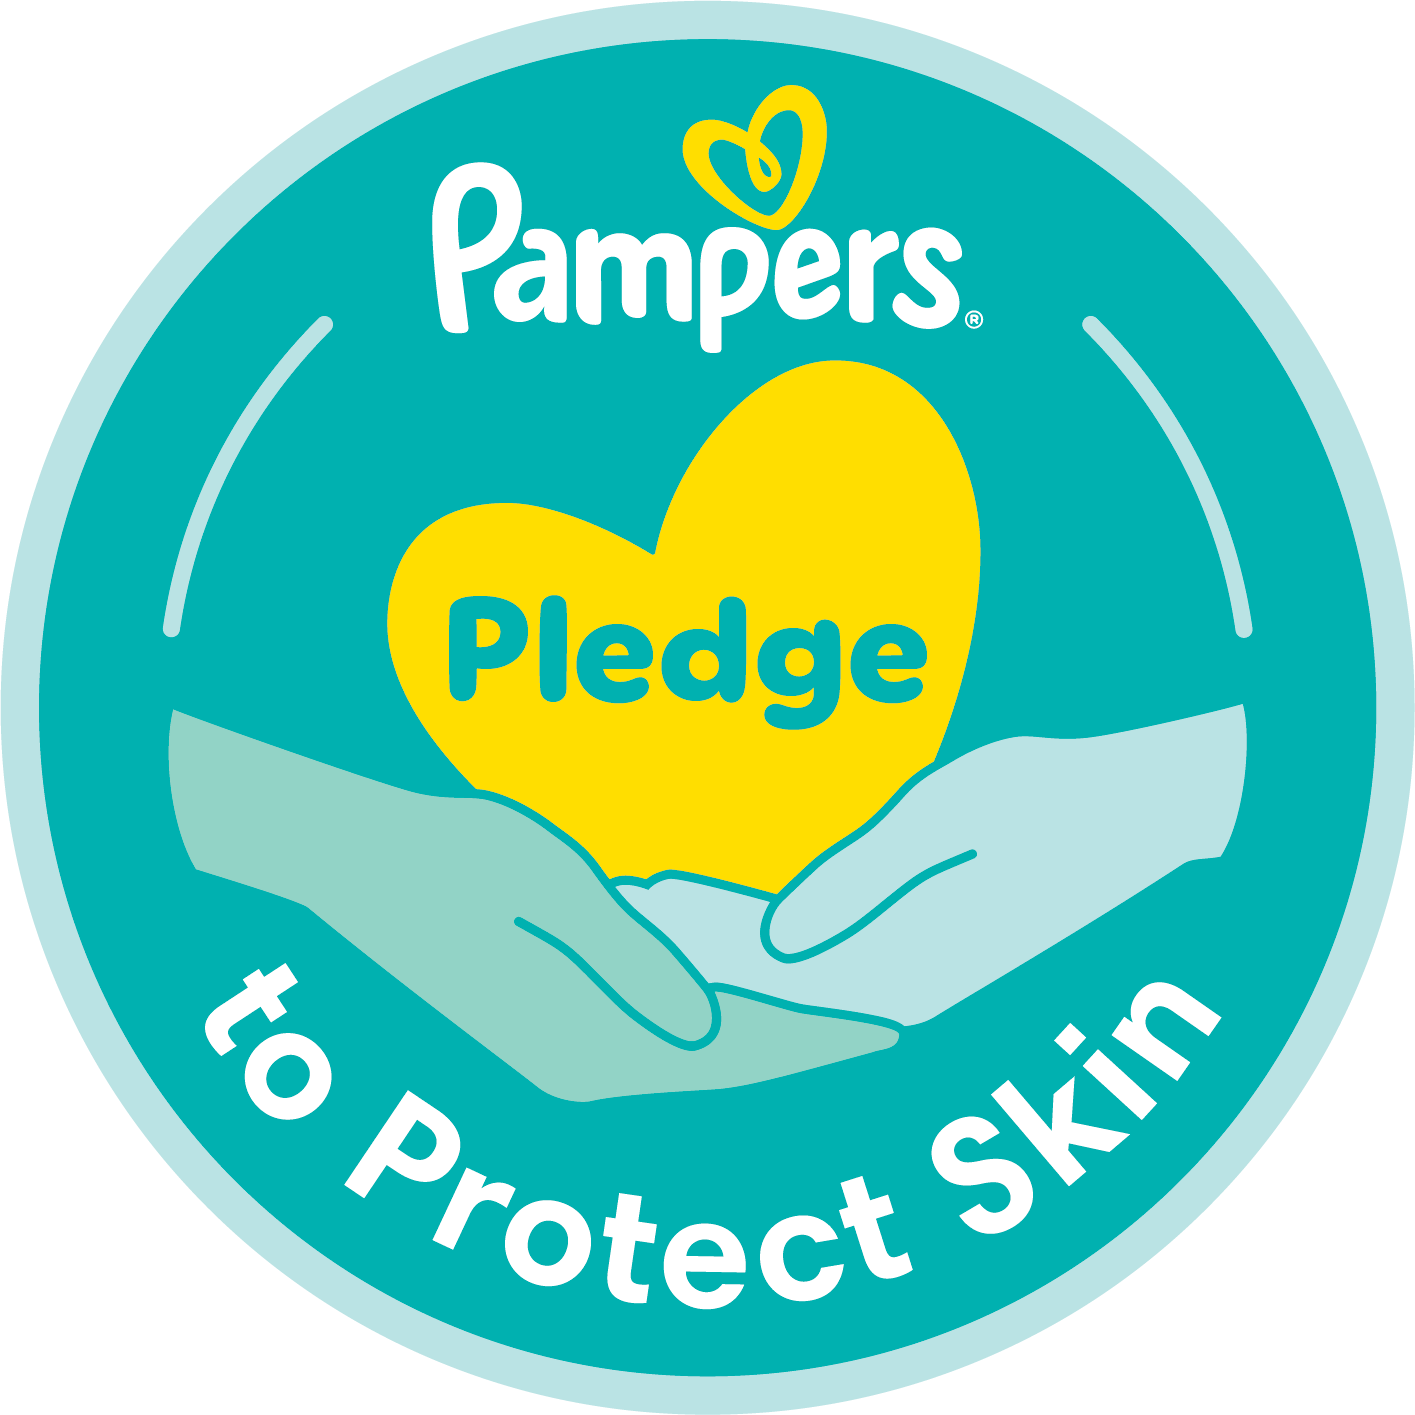 Pampers Pledge Seal